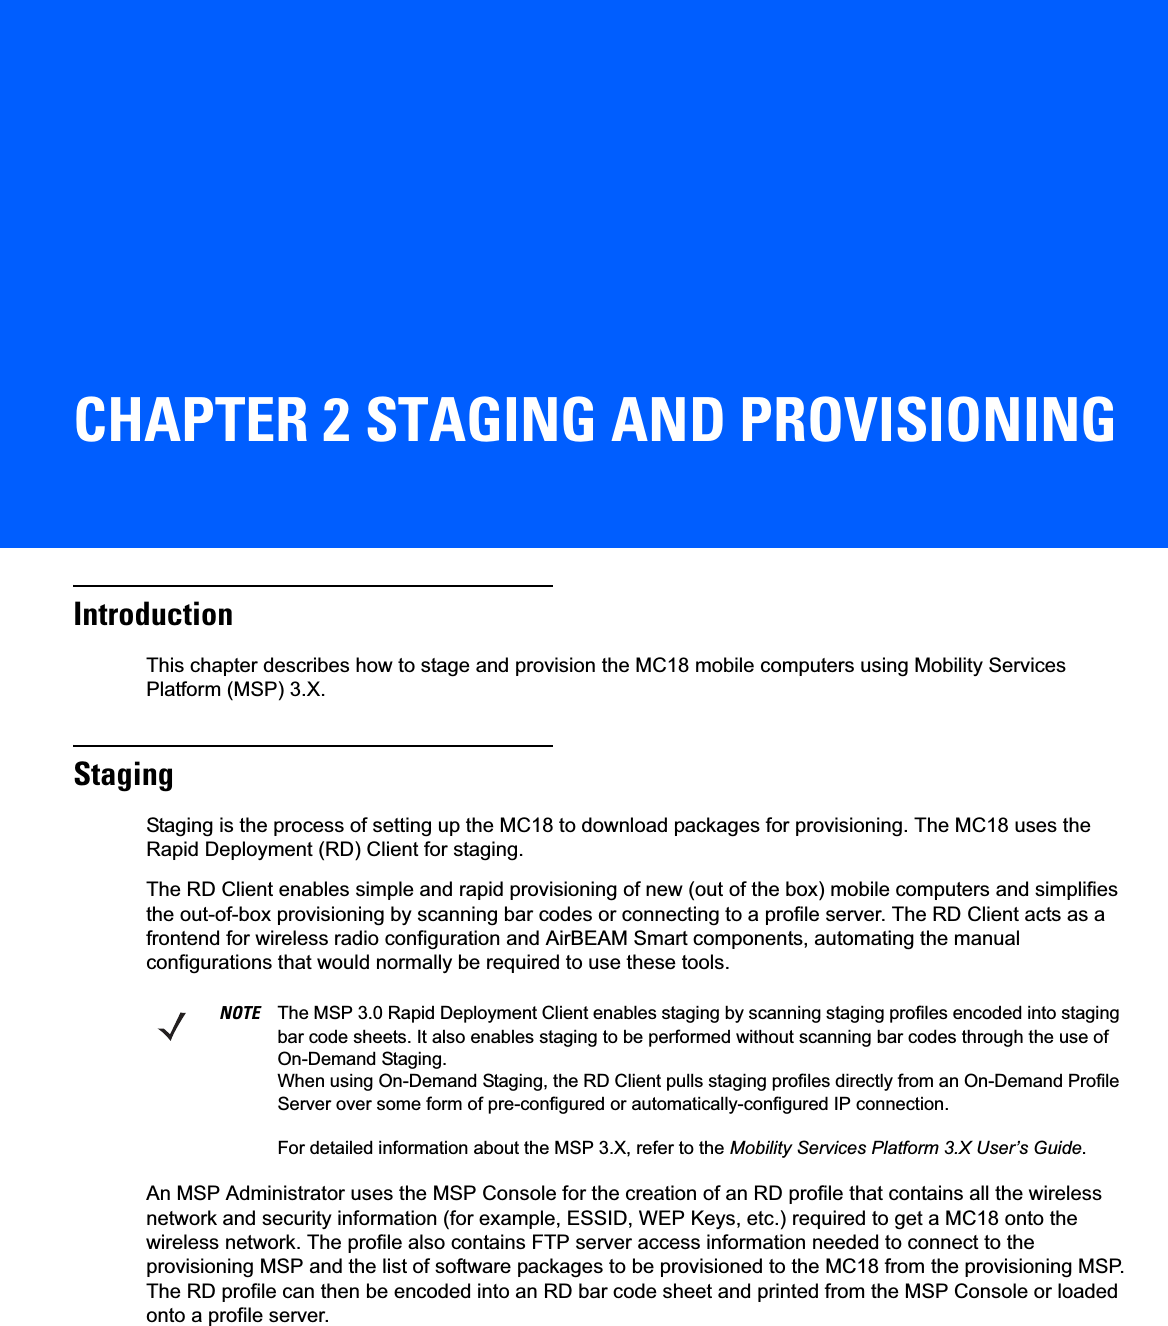 CHAPTER 2 STAGING AND PROVISIONINGIntroductionThis chapter describes how to stage and provision the MC18 mobile computers using Mobility Services Platform (MSP) 3.X.StagingStaging is the process of setting up the MC18 to download packages for provisioning. The MC18 uses the Rapid Deployment (RD) Client for staging.The RD Client enables simple and rapid provisioning of new (out of the box) mobile computers and simplifies the out-of-box provisioning by scanning bar codes or connecting to a profile server. The RD Client acts as a frontend for wireless radio configuration and AirBEAM Smart components, automating the manual configurations that would normally be required to use these tools.An MSP Administrator uses the MSP Console for the creation of an RD profile that contains all the wireless network and security information (for example, ESSID, WEP Keys, etc.) required to get a MC18 onto the wireless network. The profile also contains FTP server access information needed to connect to the provisioning MSP and the list of software packages to be provisioned to the MC18 from the provisioning MSP. The RD profile can then be encoded into an RD bar code sheet and printed from the MSP Console or loaded onto a profile server.NOTE The MSP 3.0 Rapid Deployment Client enables staging by scanning staging profiles encoded into staging bar code sheets. It also enables staging to be performed without scanning bar codes through the use of On-Demand Staging.When using On-Demand Staging, the RD Client pulls staging profiles directly from an On-Demand Profile Server over some form of pre-configured or automatically-configured IP connection.For detailed information about the MSP 3.X, refer to the Mobility Services Platform 3.X User’s Guide.